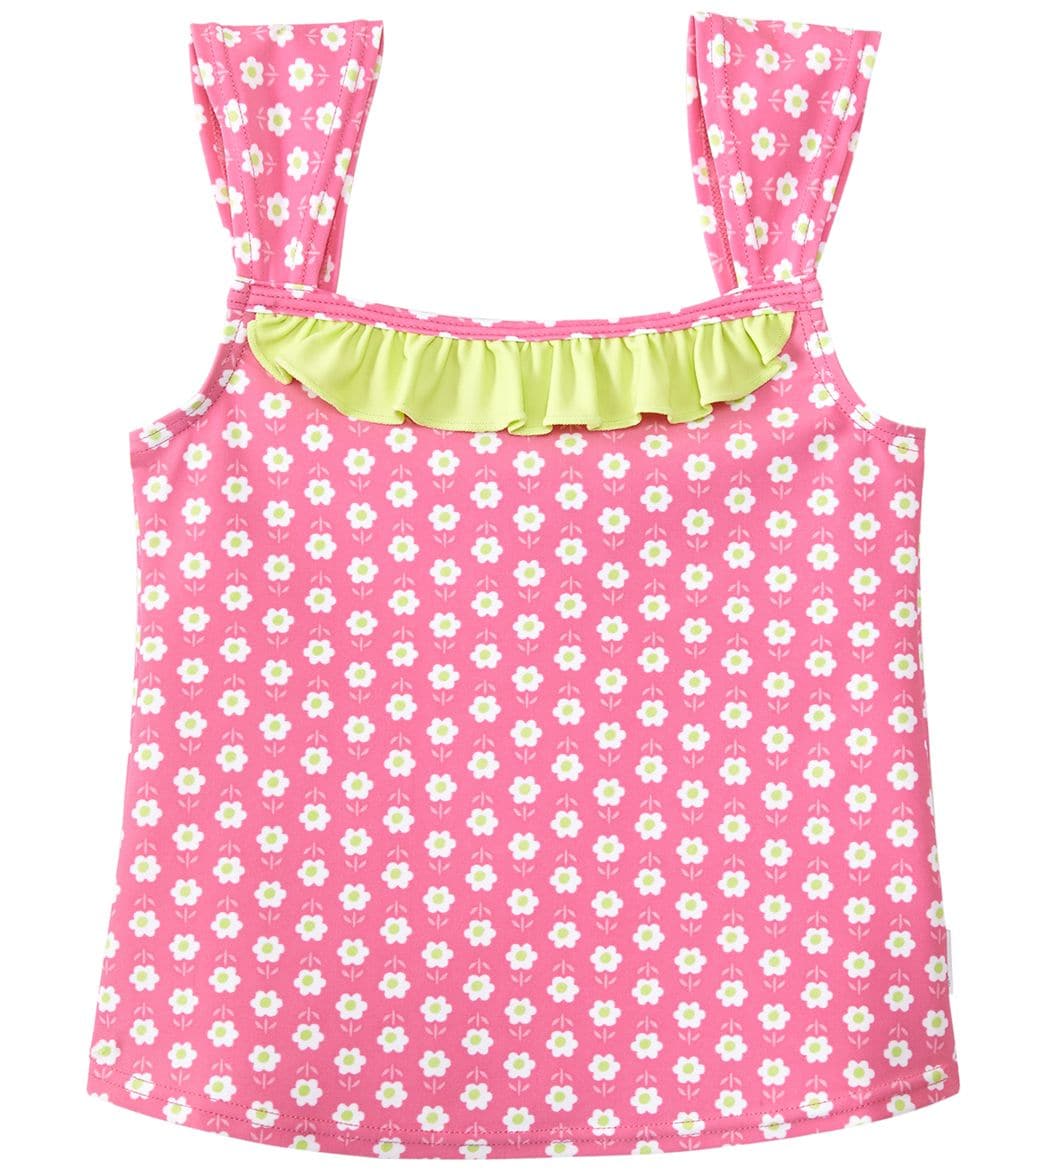 I Play. By Green Sprouts Girls' Classic Ruffle Swimsuit Top Baby - Hot Pink Daisy 18 Months - Swimoutlet.com